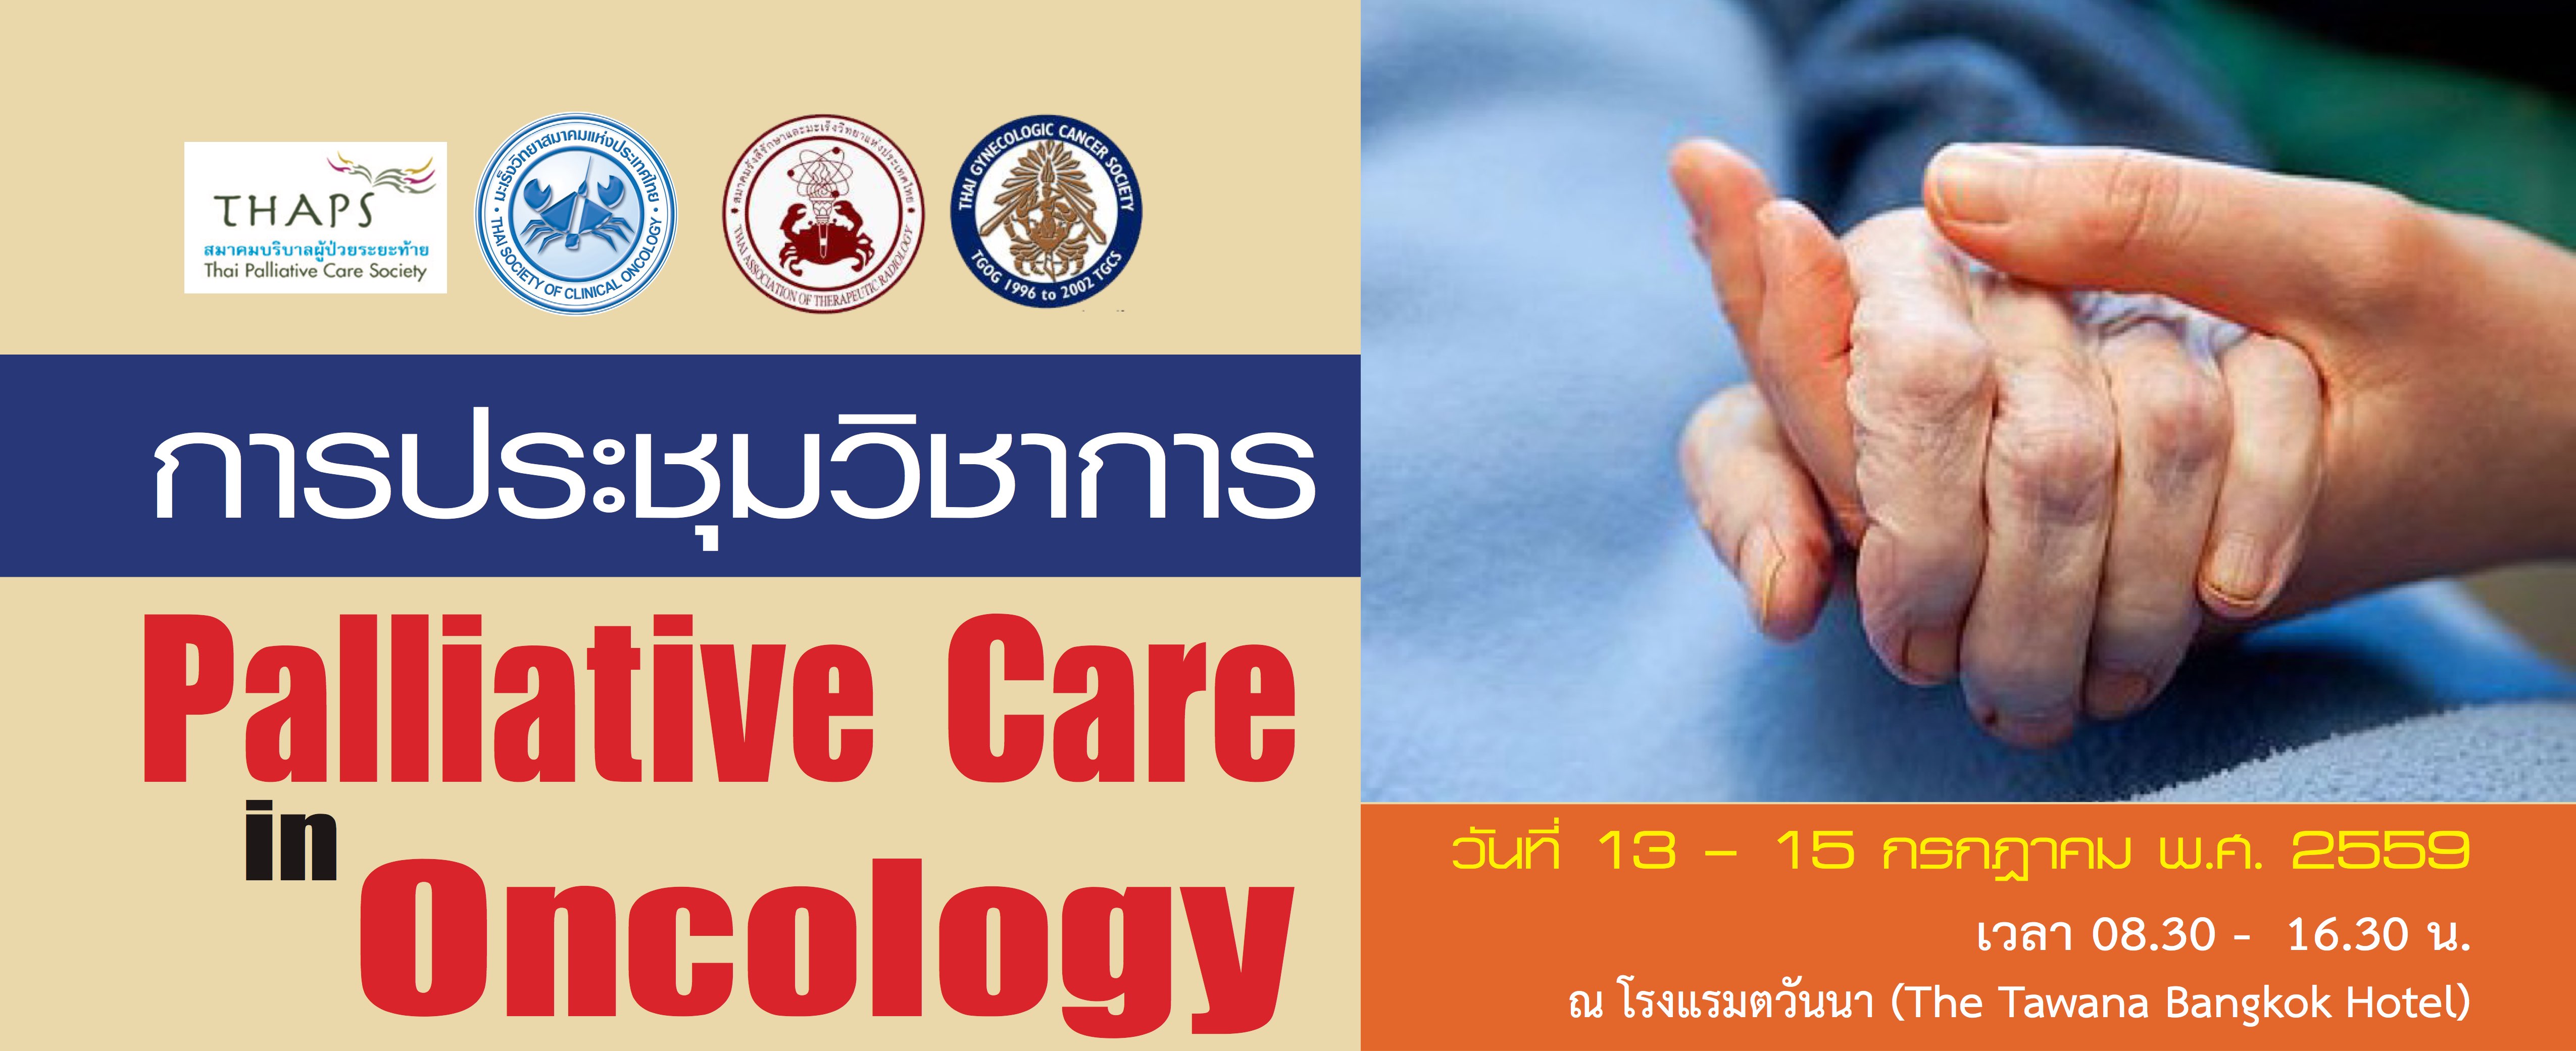 Palliative care in Oncology